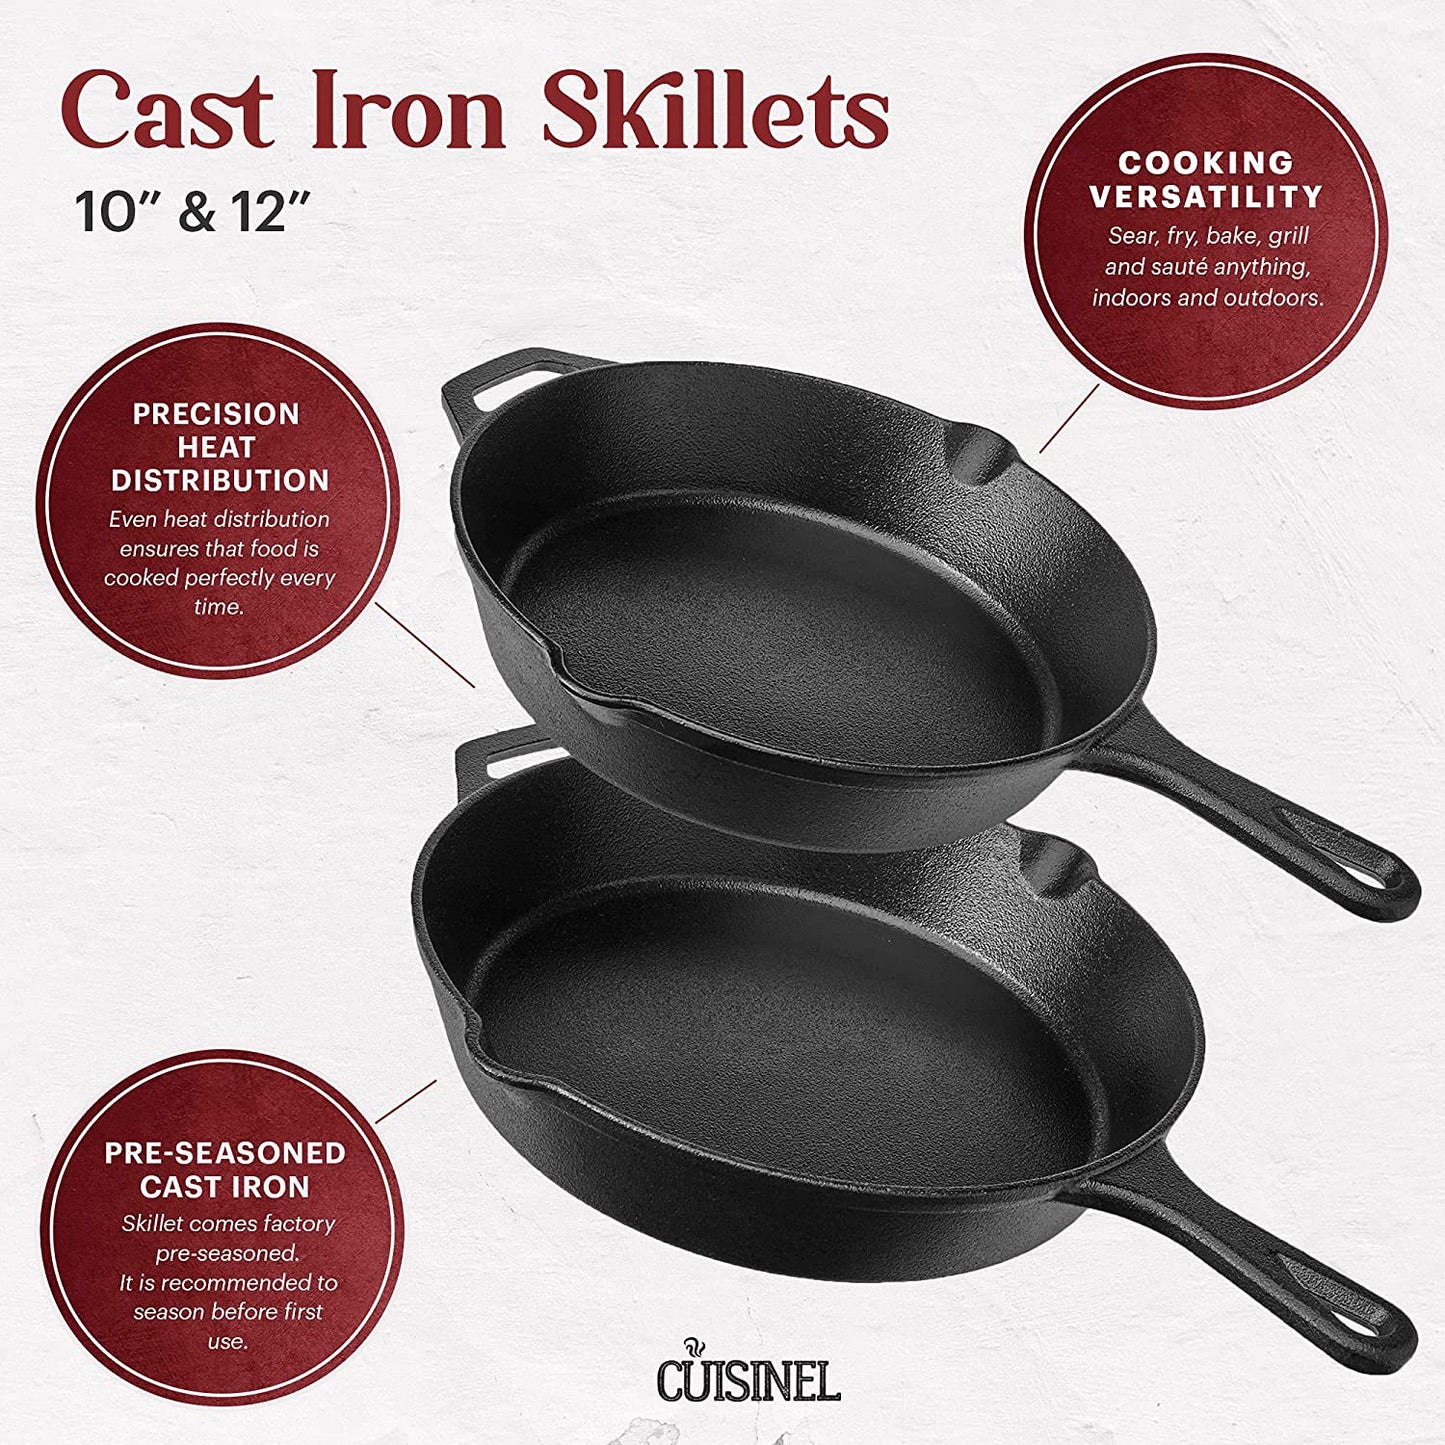 Cast Iron Skillet Set - 10" + 12" Frying Pan + Glass Lids + 2 Handle Cover Grips - Pre-Seasoned Oven Cookware - Indoor/Outdoor Use - Grill, Stovetop, Induction, BBQ, Camping, Fire Use